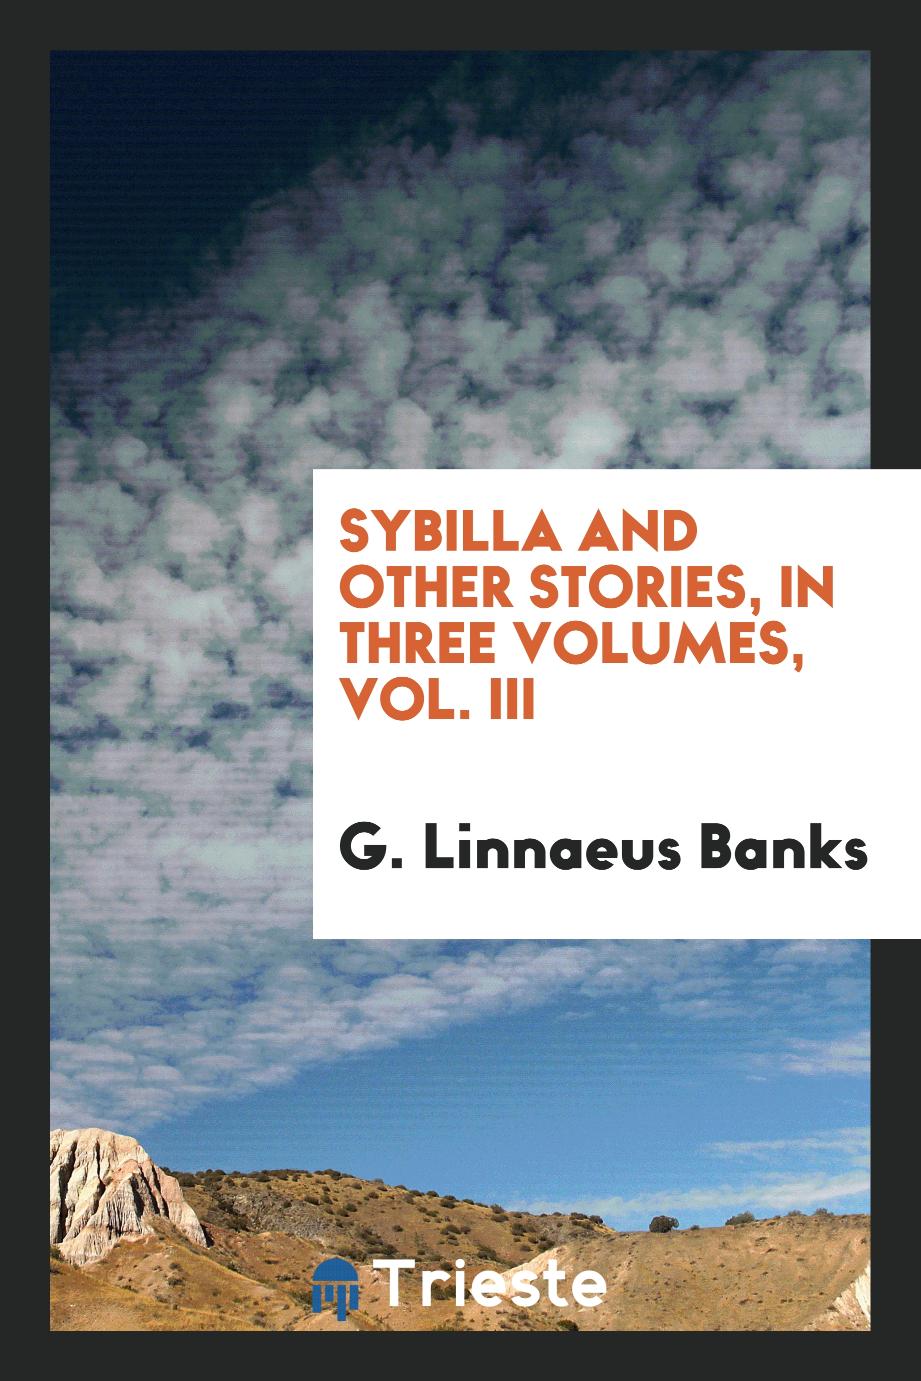 Sybilla and other stories, In three volumes, Vol. III